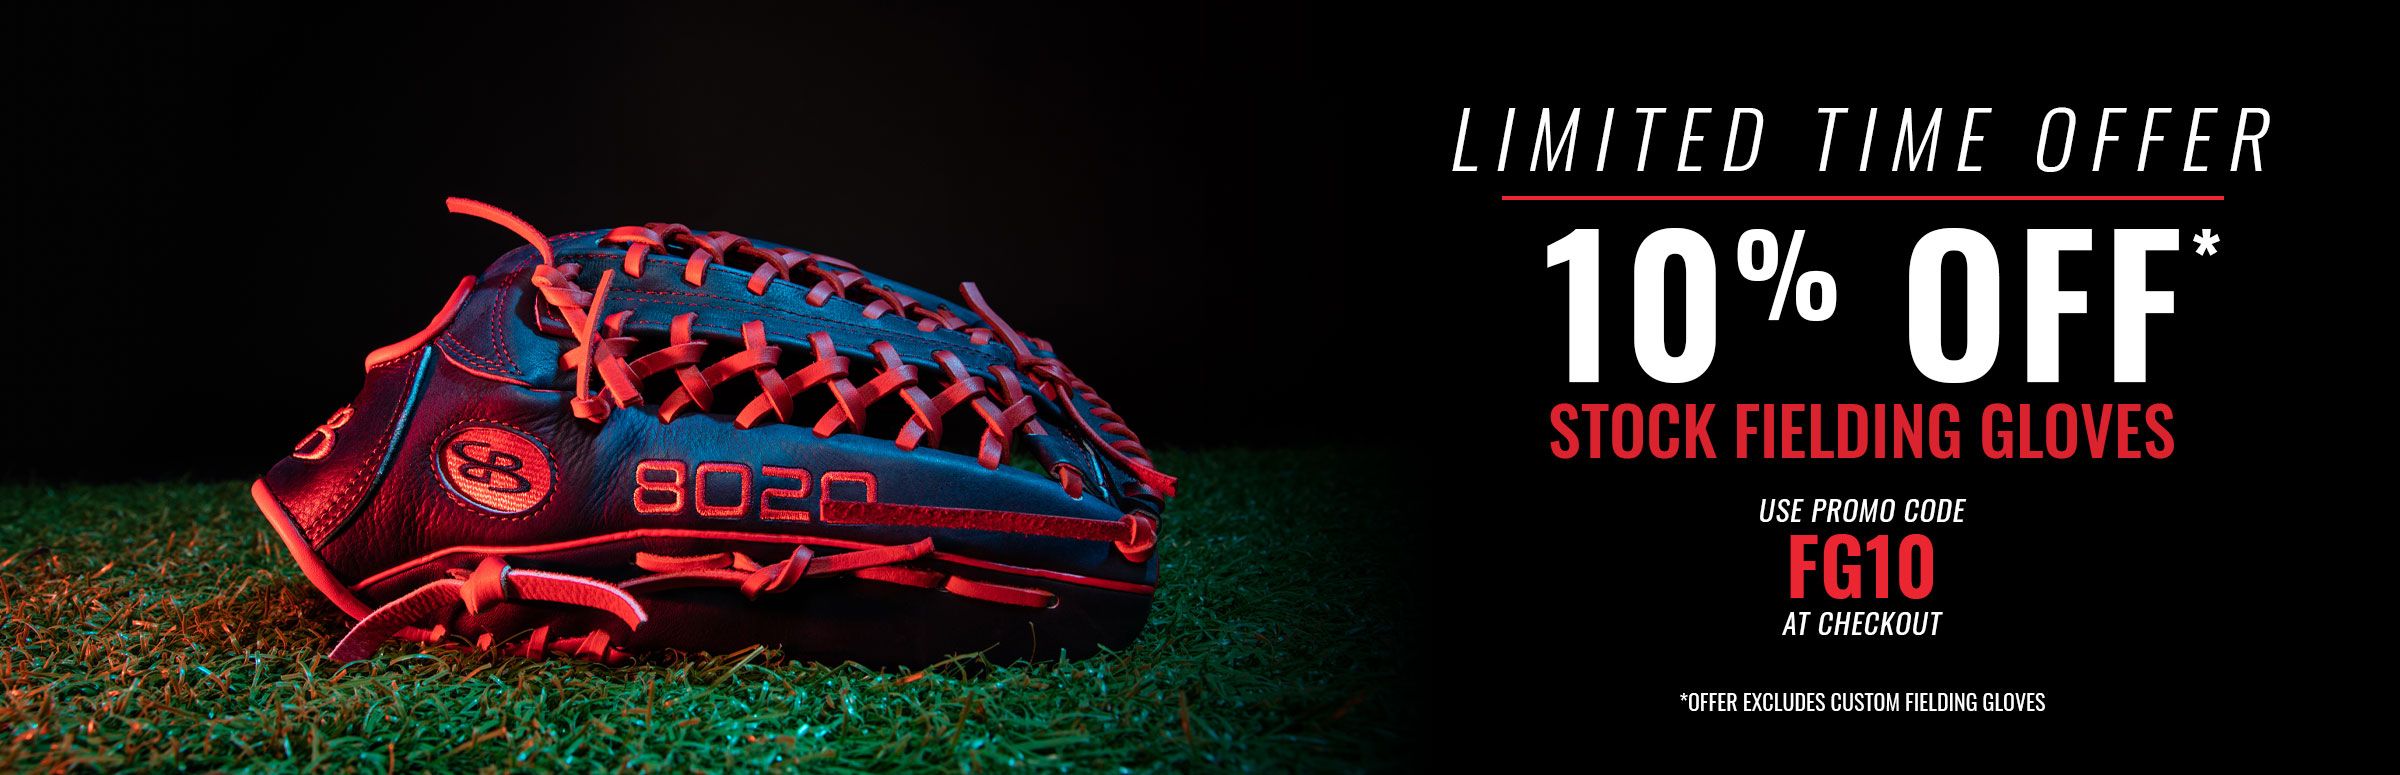 10% Off Fielding Gloves - Use Promo Code FG10